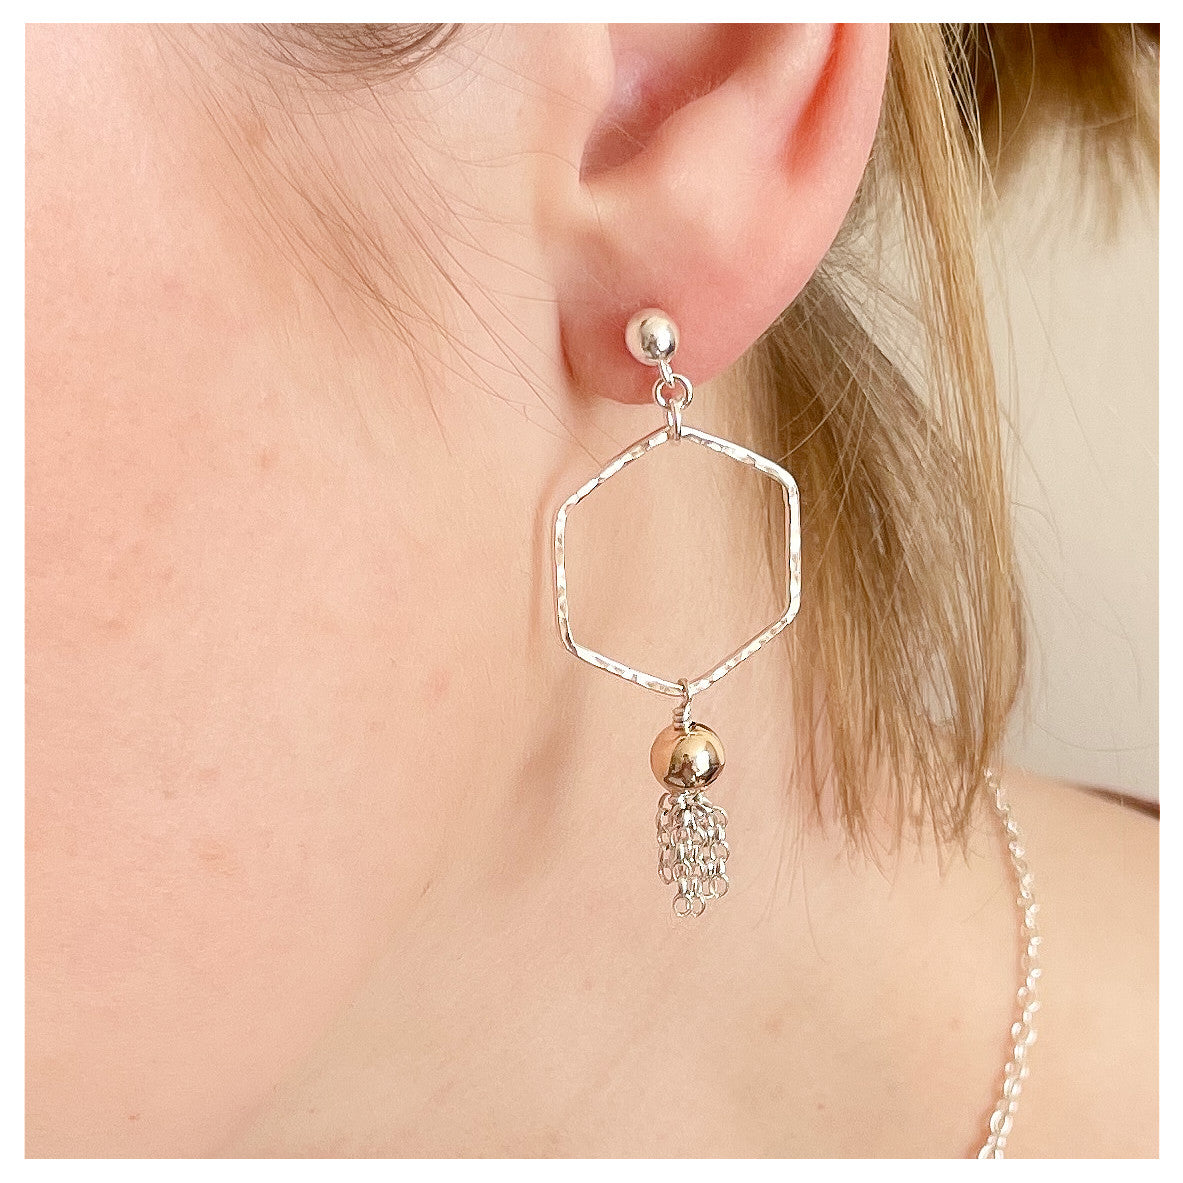 9ct Yellow Gold and Sterling Silver Hammered Hexagon and Large Tassel Drop Stud Earrings.